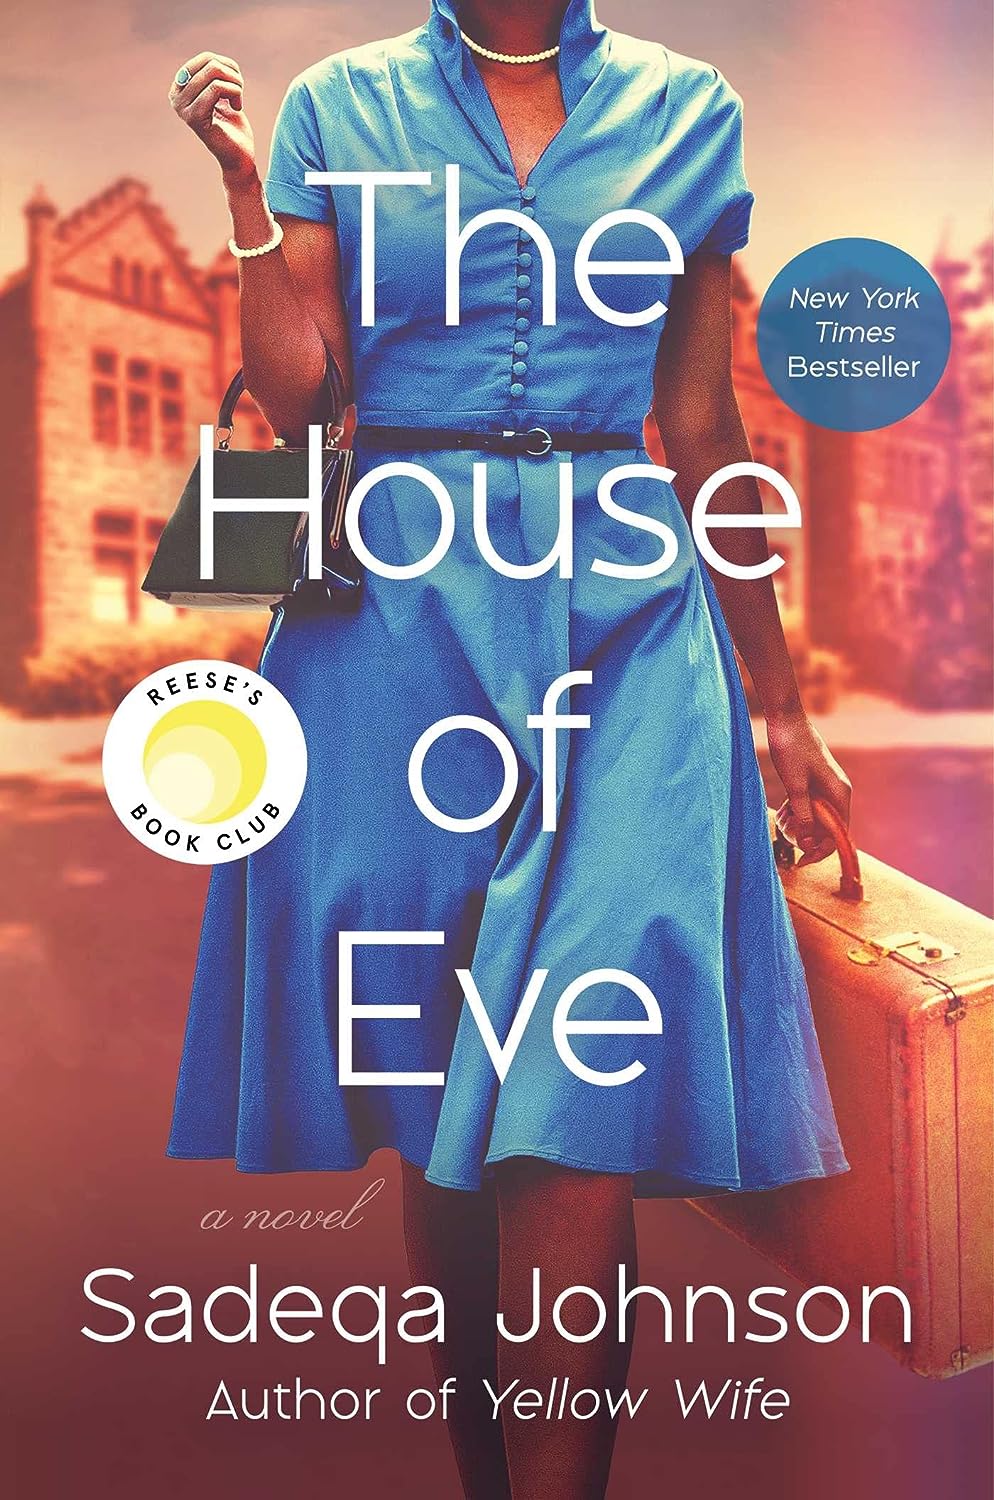 Image for "The House of Eve: A Novel"